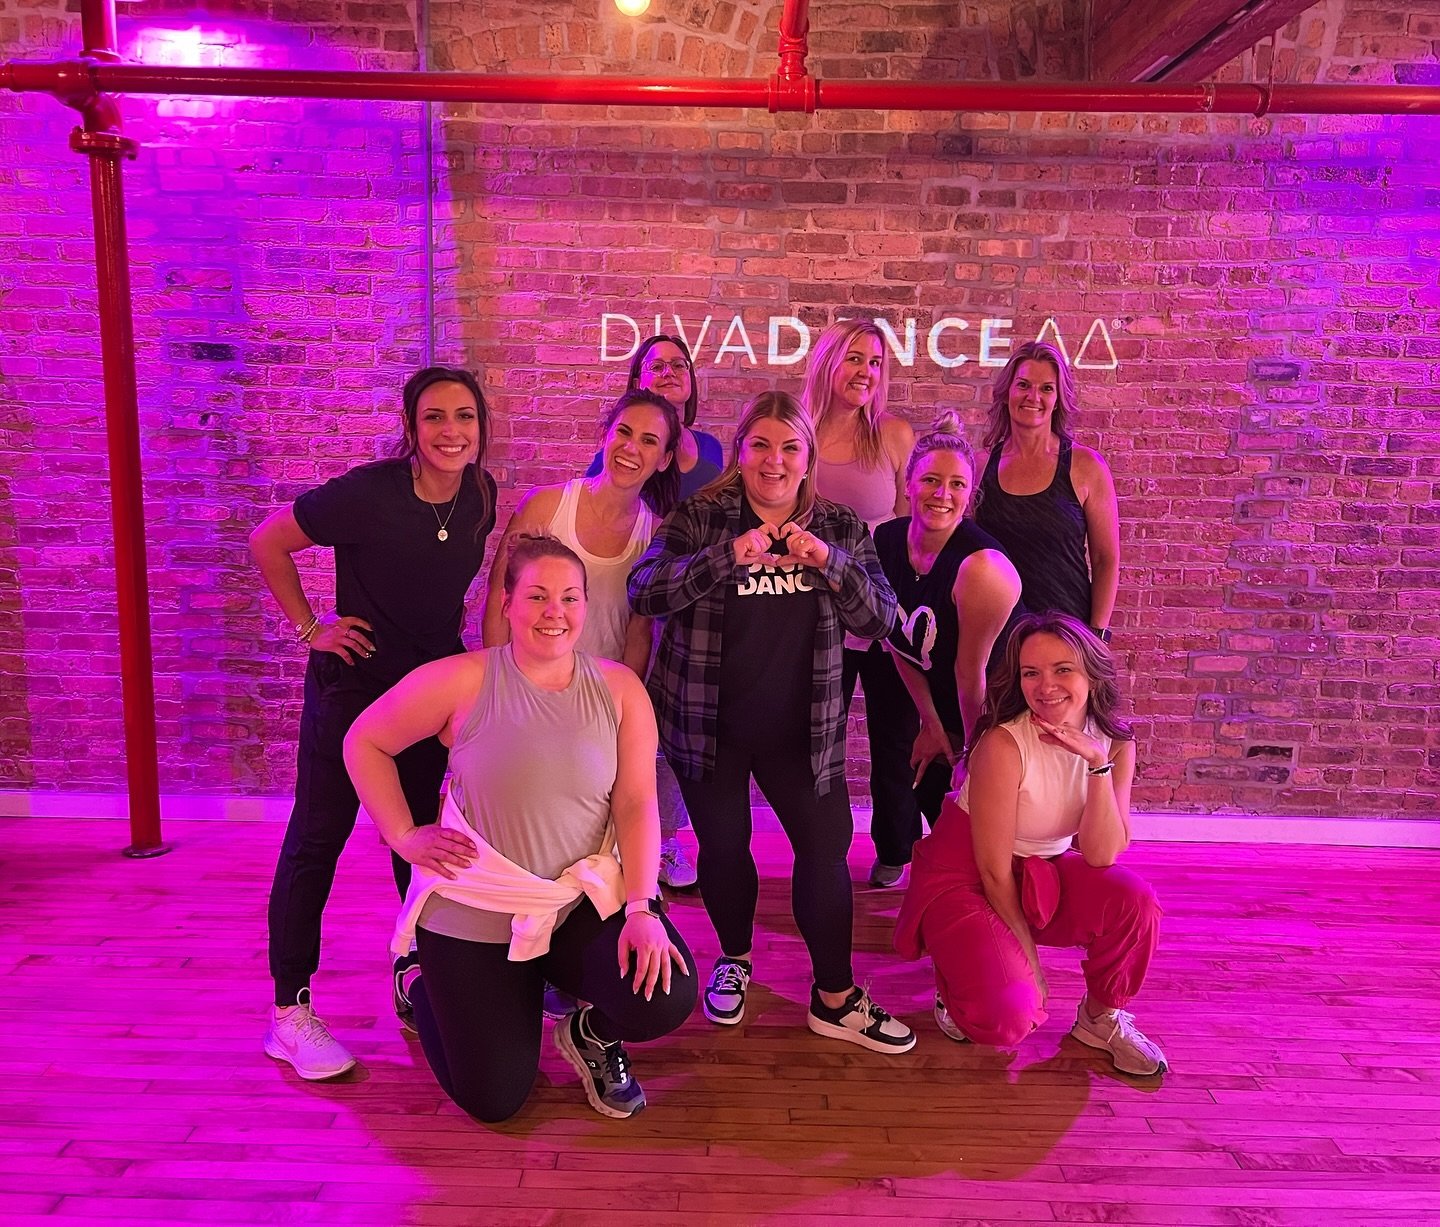 Our field trip to @divadancechi was a HIT! 
It was so fun to learn a cool new routine with even cooler ladies! We even got a surprise visit from the Founder and CEO of DivaDance @jamistig 

#divadance #divadancechi